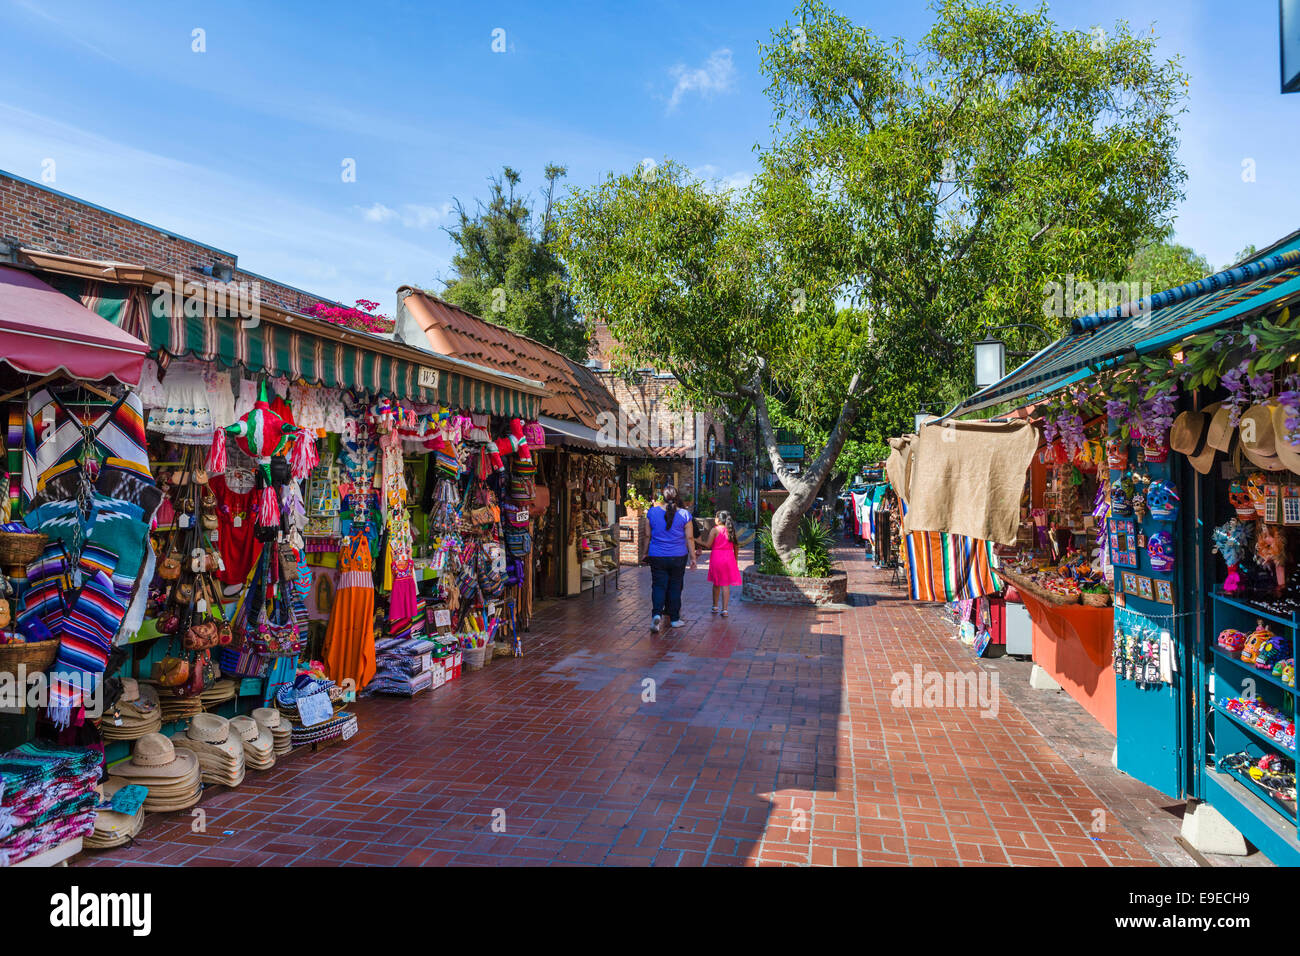 Shops and market booths on Olvera Street in Los Angeles Plaza Historic District, Los Angeles, California, USA Stock Photo